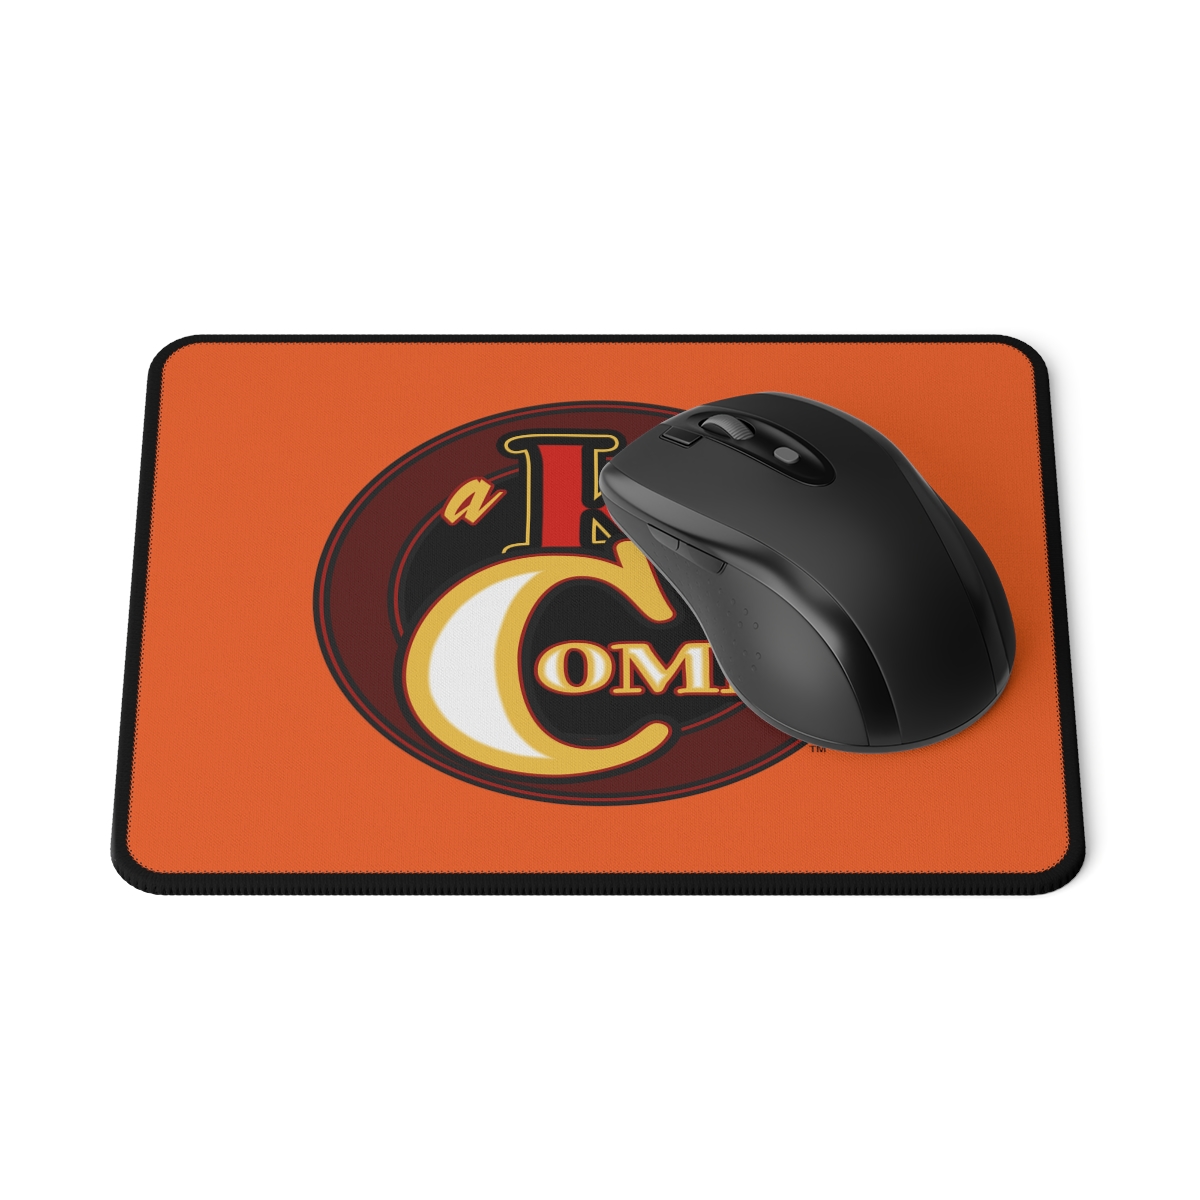 Non-Slip Mouse Pads product main image